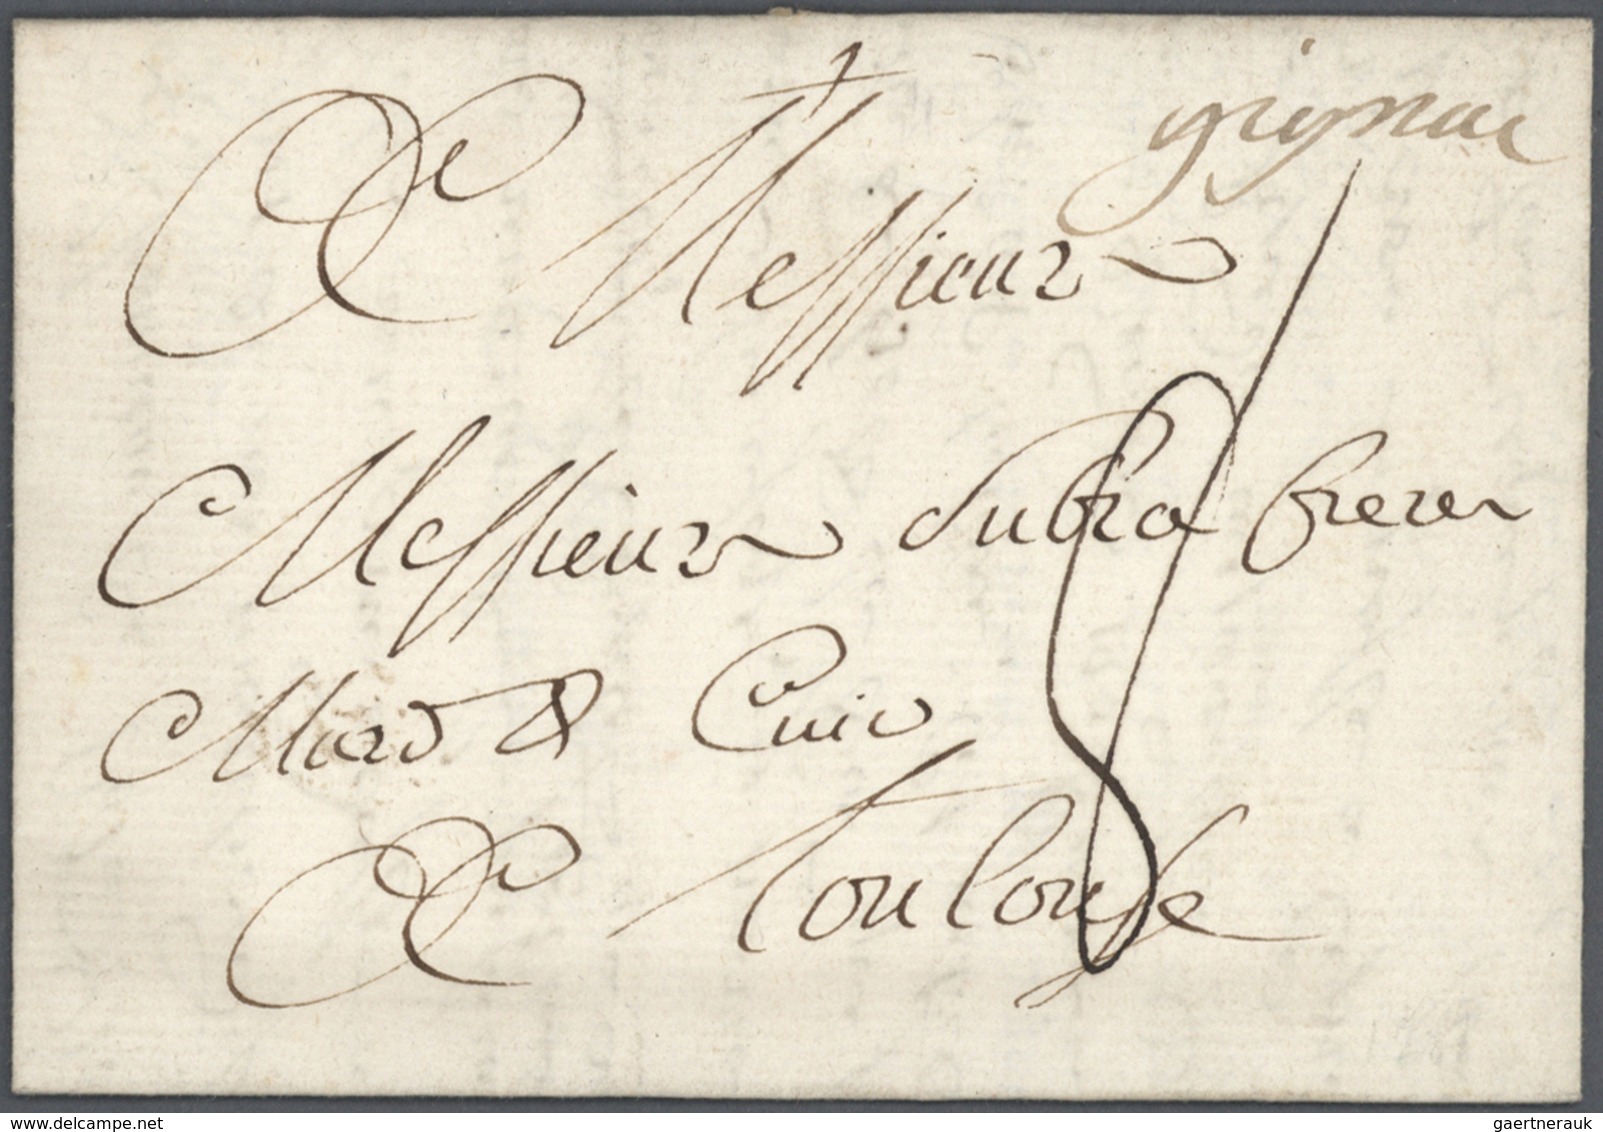 26349 Frankreich - Vorphilatelie: 1744/1791 ca., useful lot of 160 folded letters with cancellations of th